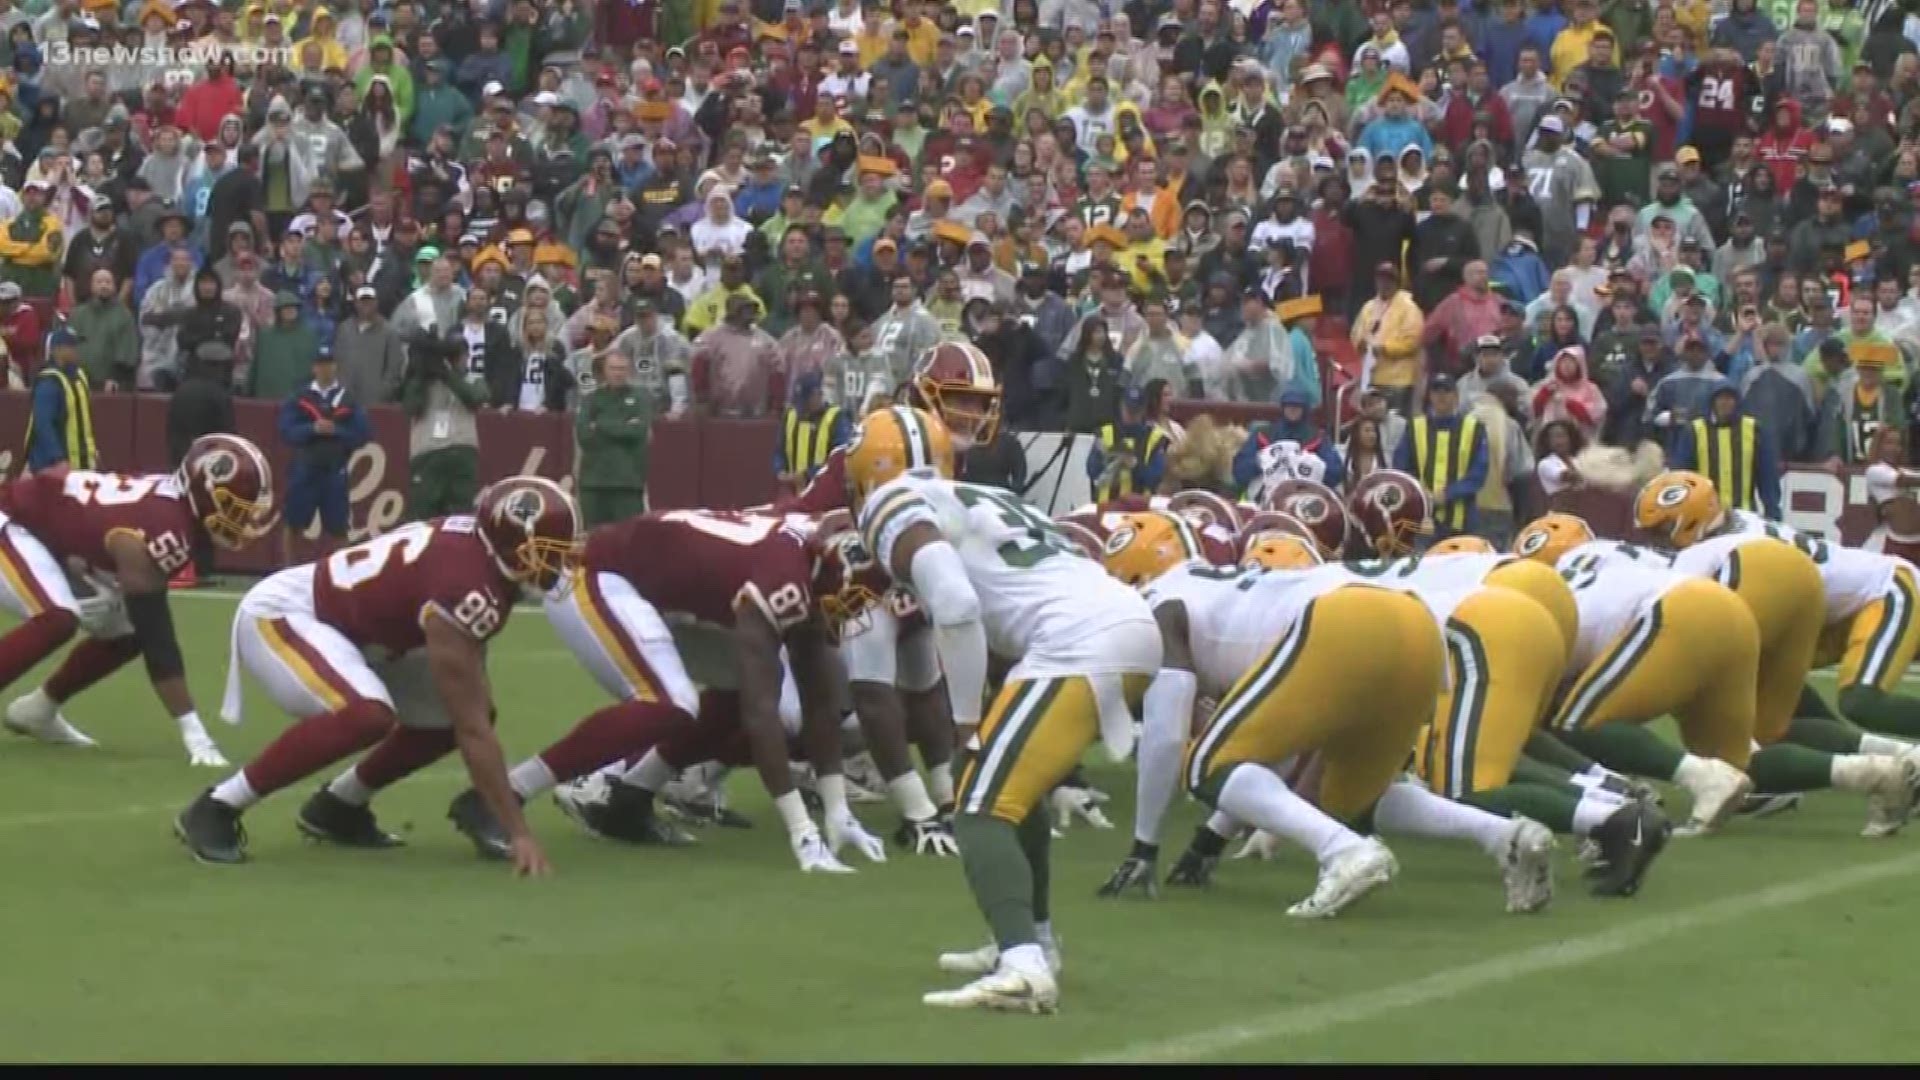 Washington QB, Alex Smith passed for 2 touchdowns and Adrian Peterson rushed for 2 more as they won over Green Bay 31-17. 13 Sports Director Scott has a recap of the game.